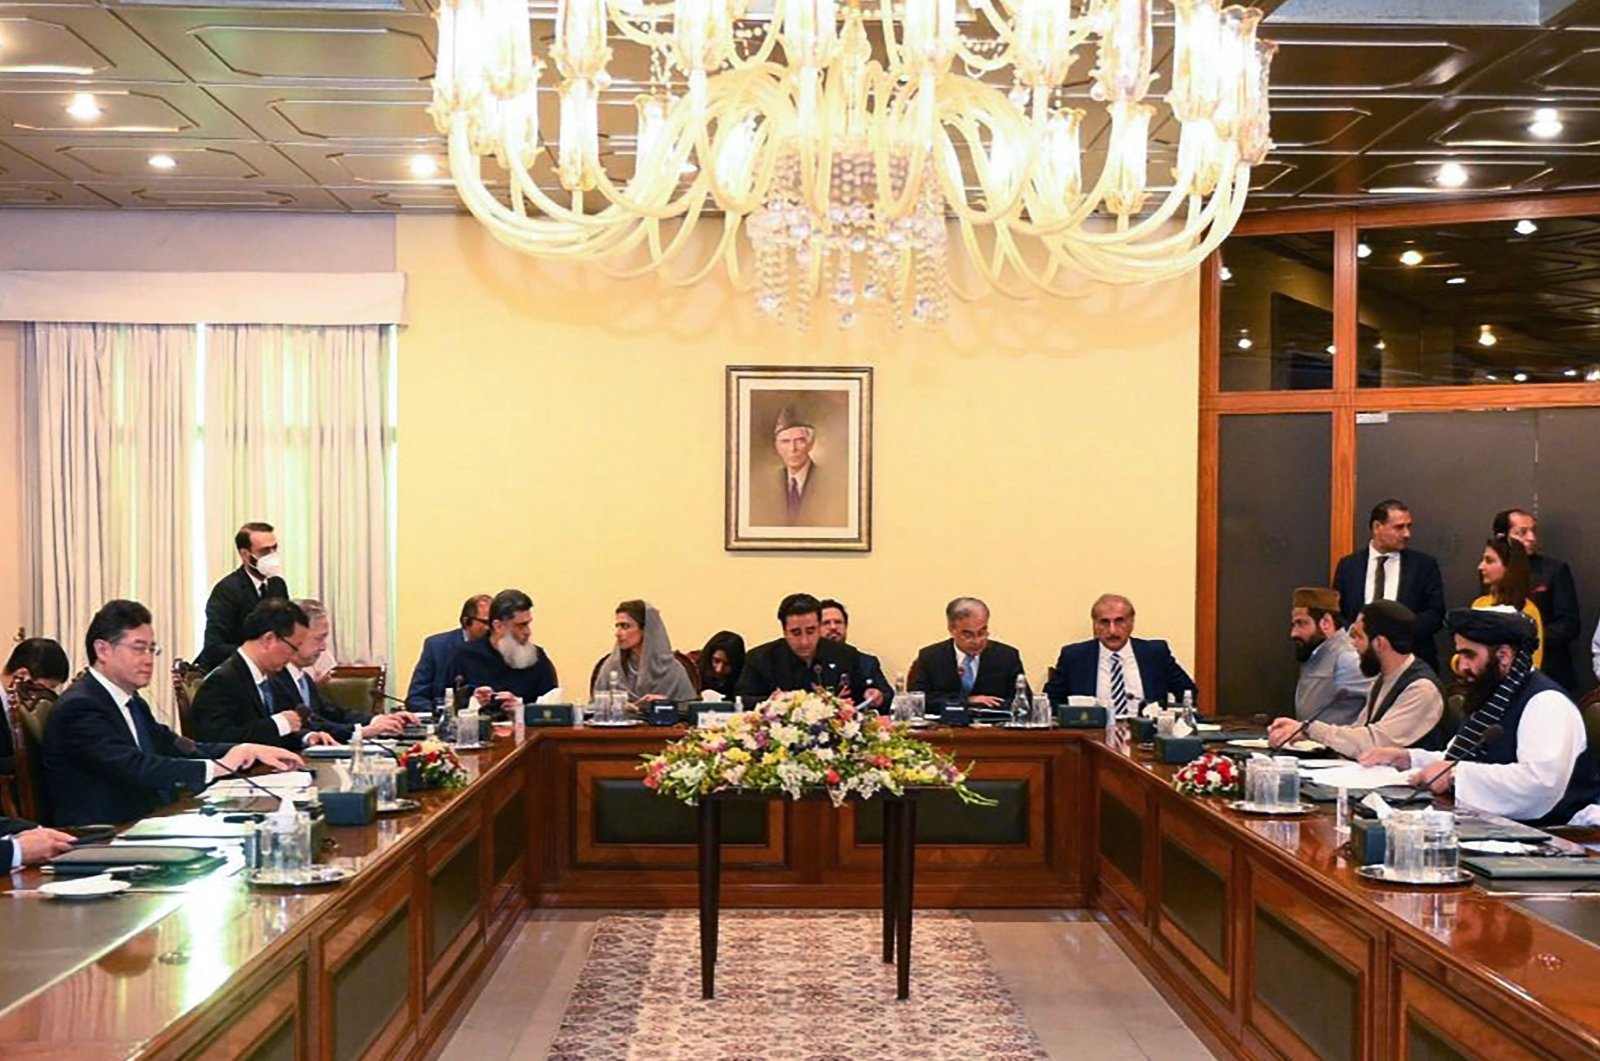 A photograph distributed by the Pakistan Information Department (PID) features Bilawal Bhutto Zardari, Pakistan's Foreign Minister, speaking alongside Chinese Foreign Minister Qin Gang (L) and Afghanistan's interim Foreign Minister Amir Khan Muttaqi (R) during a meeting in Islamabad.